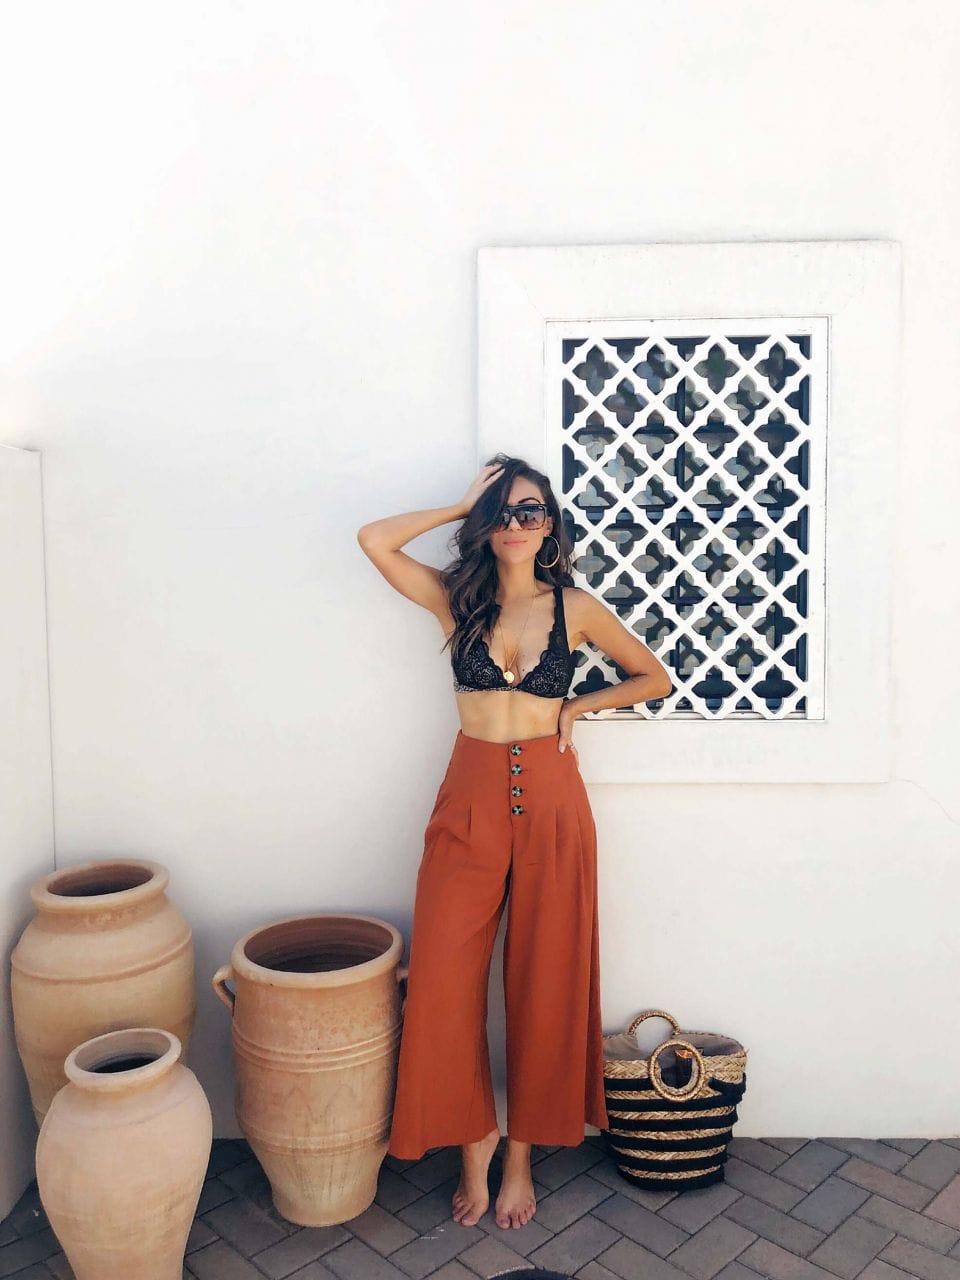 https://imagecdn.stylewithnihan.com/wp-content/uploads/2018/08/Style_with_Nihan_7_wide_leg-_trousers-_for_end_of_summer_fall.jpg?strip=all&lossy=1&ssl=1